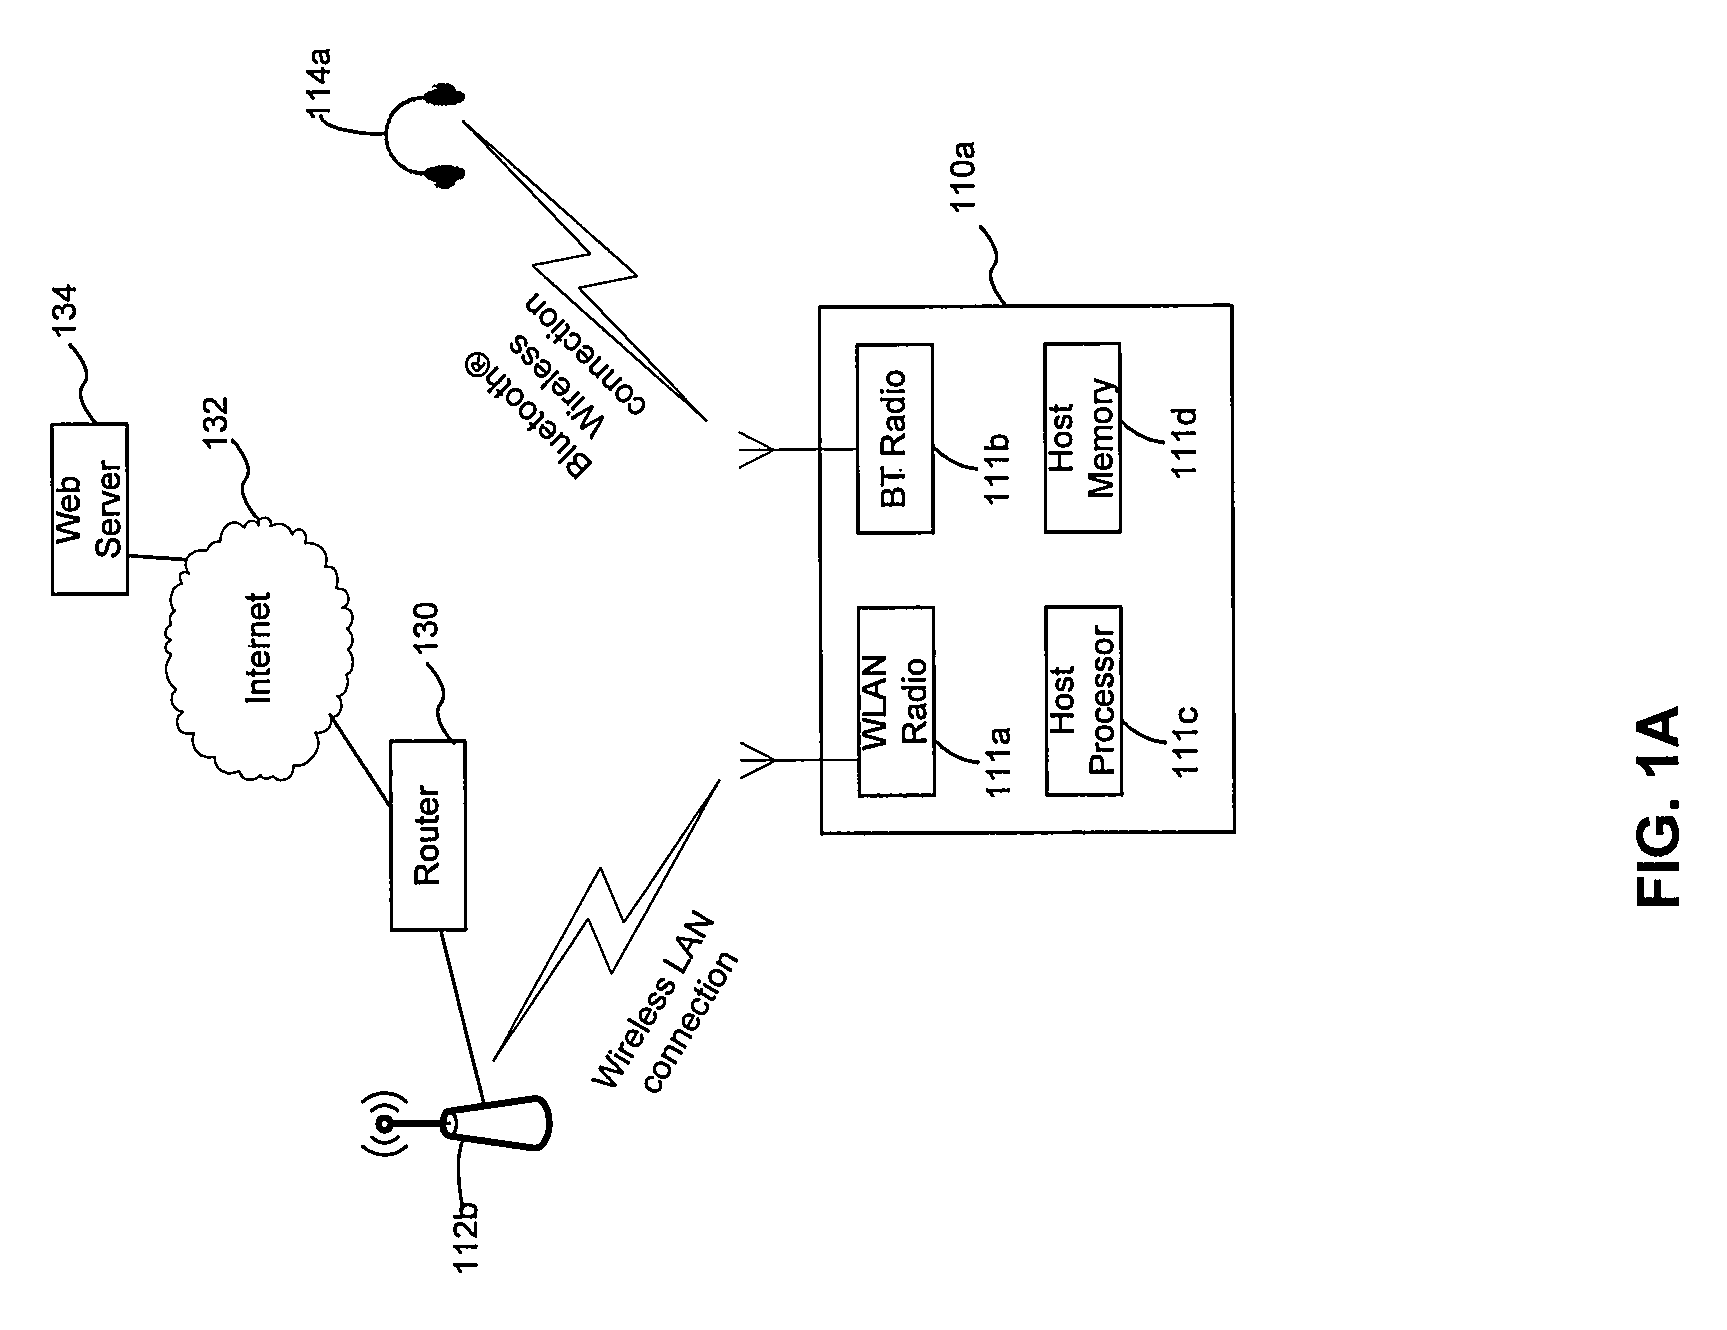 Method and system for polar modulation using a direct digital frequency synthesizer